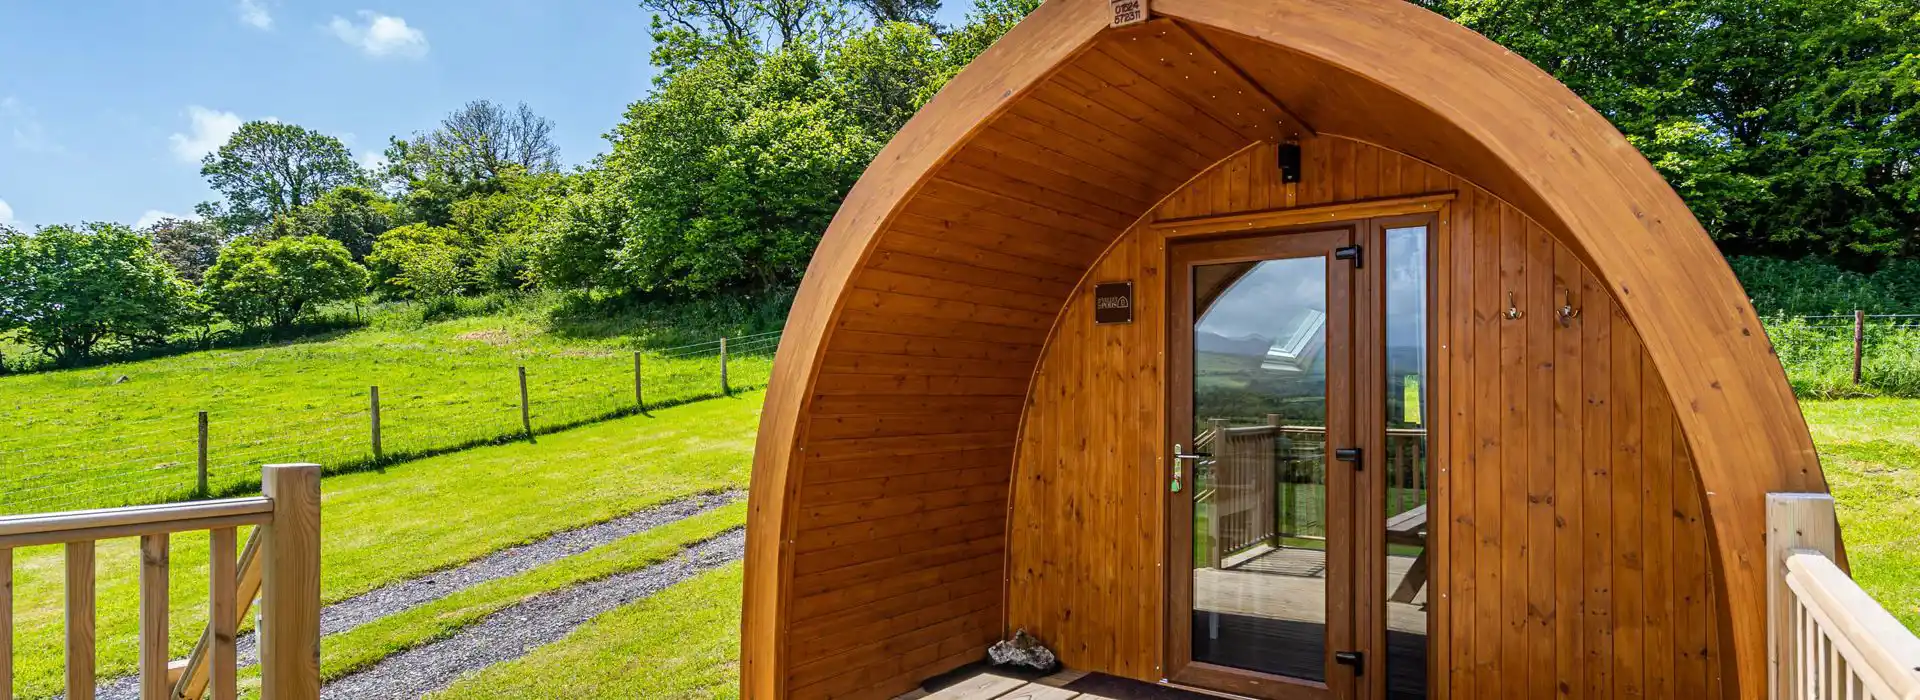 Cockermouth camping and glamping pods